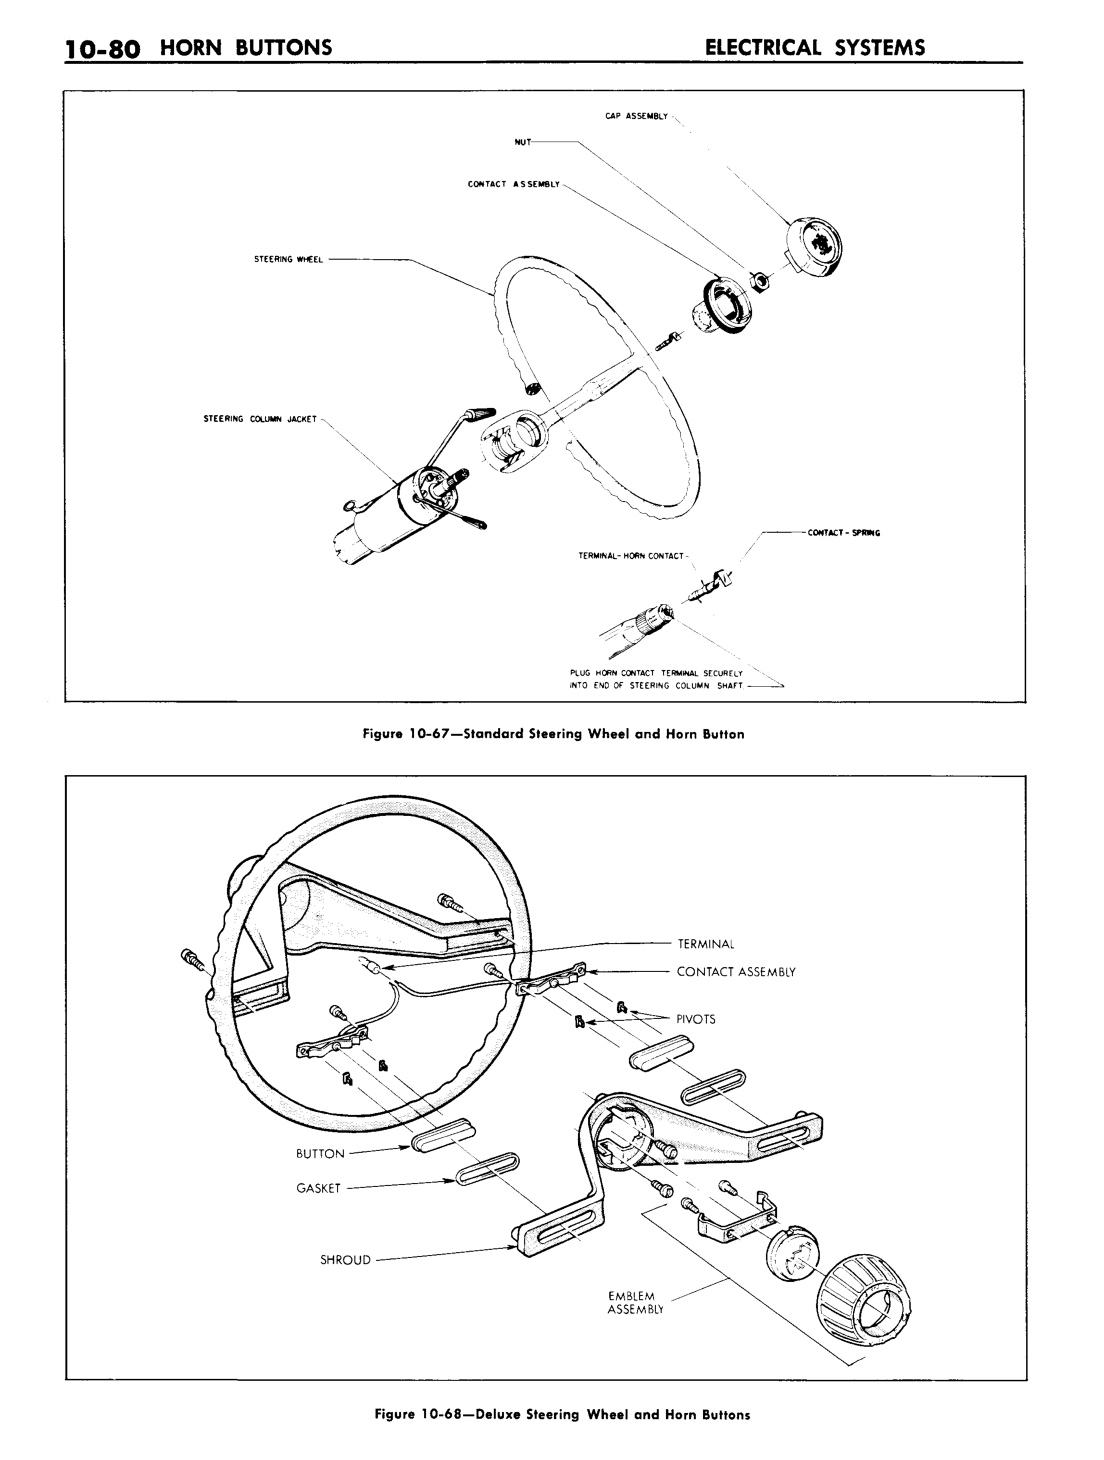 n_11 1960 Buick Shop Manual - Electrical Systems-080-080.jpg